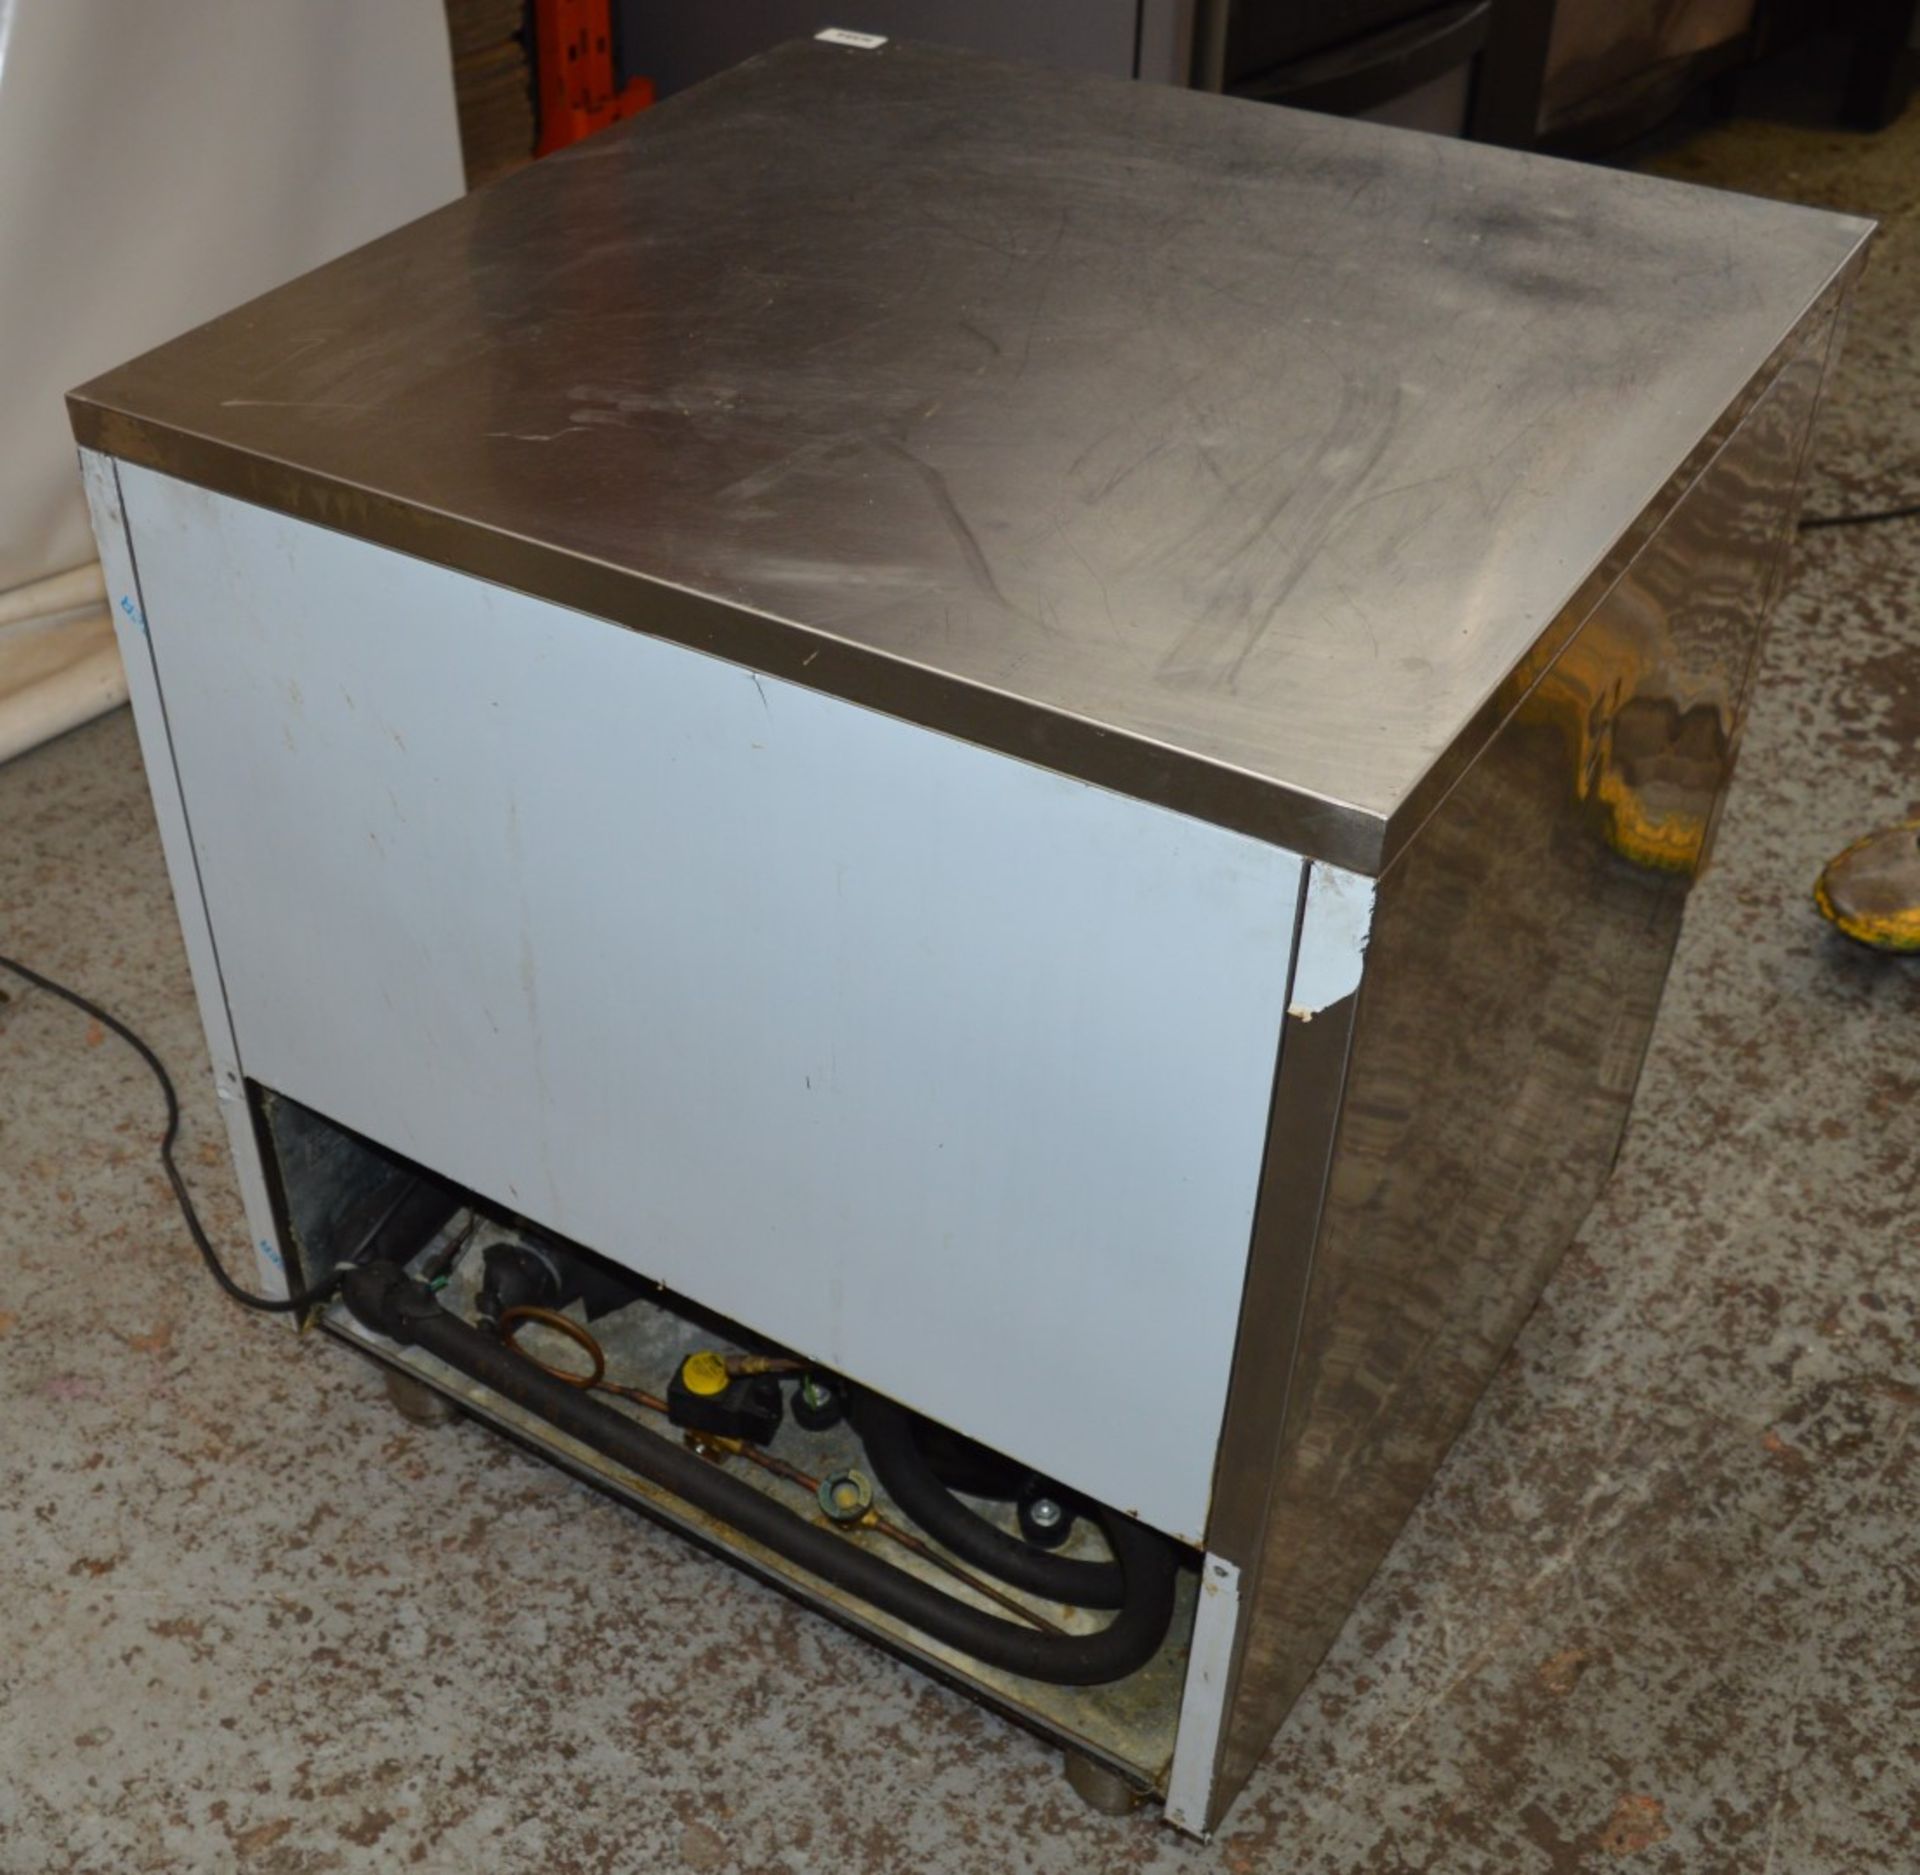 1 x Ital Compact Undercounter Blast Chiller - Stainless Steel - H82 x W75.5 x D74 cms - CL232 - - Image 6 of 7